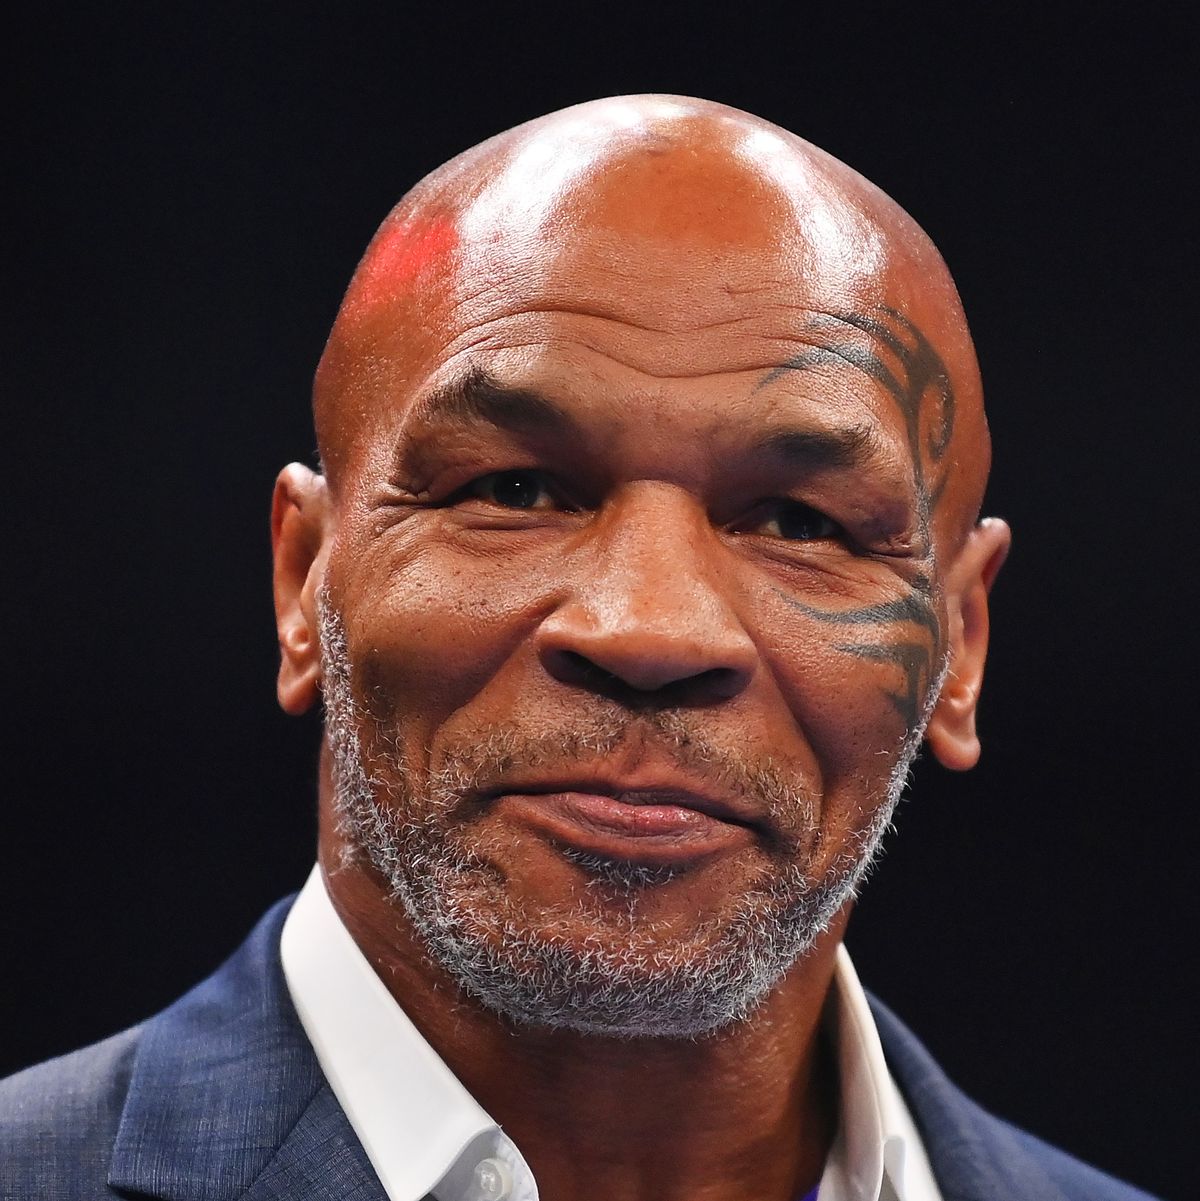 Mike Tyson: The Rise, Fall, and Redemption of a Boxing Legend